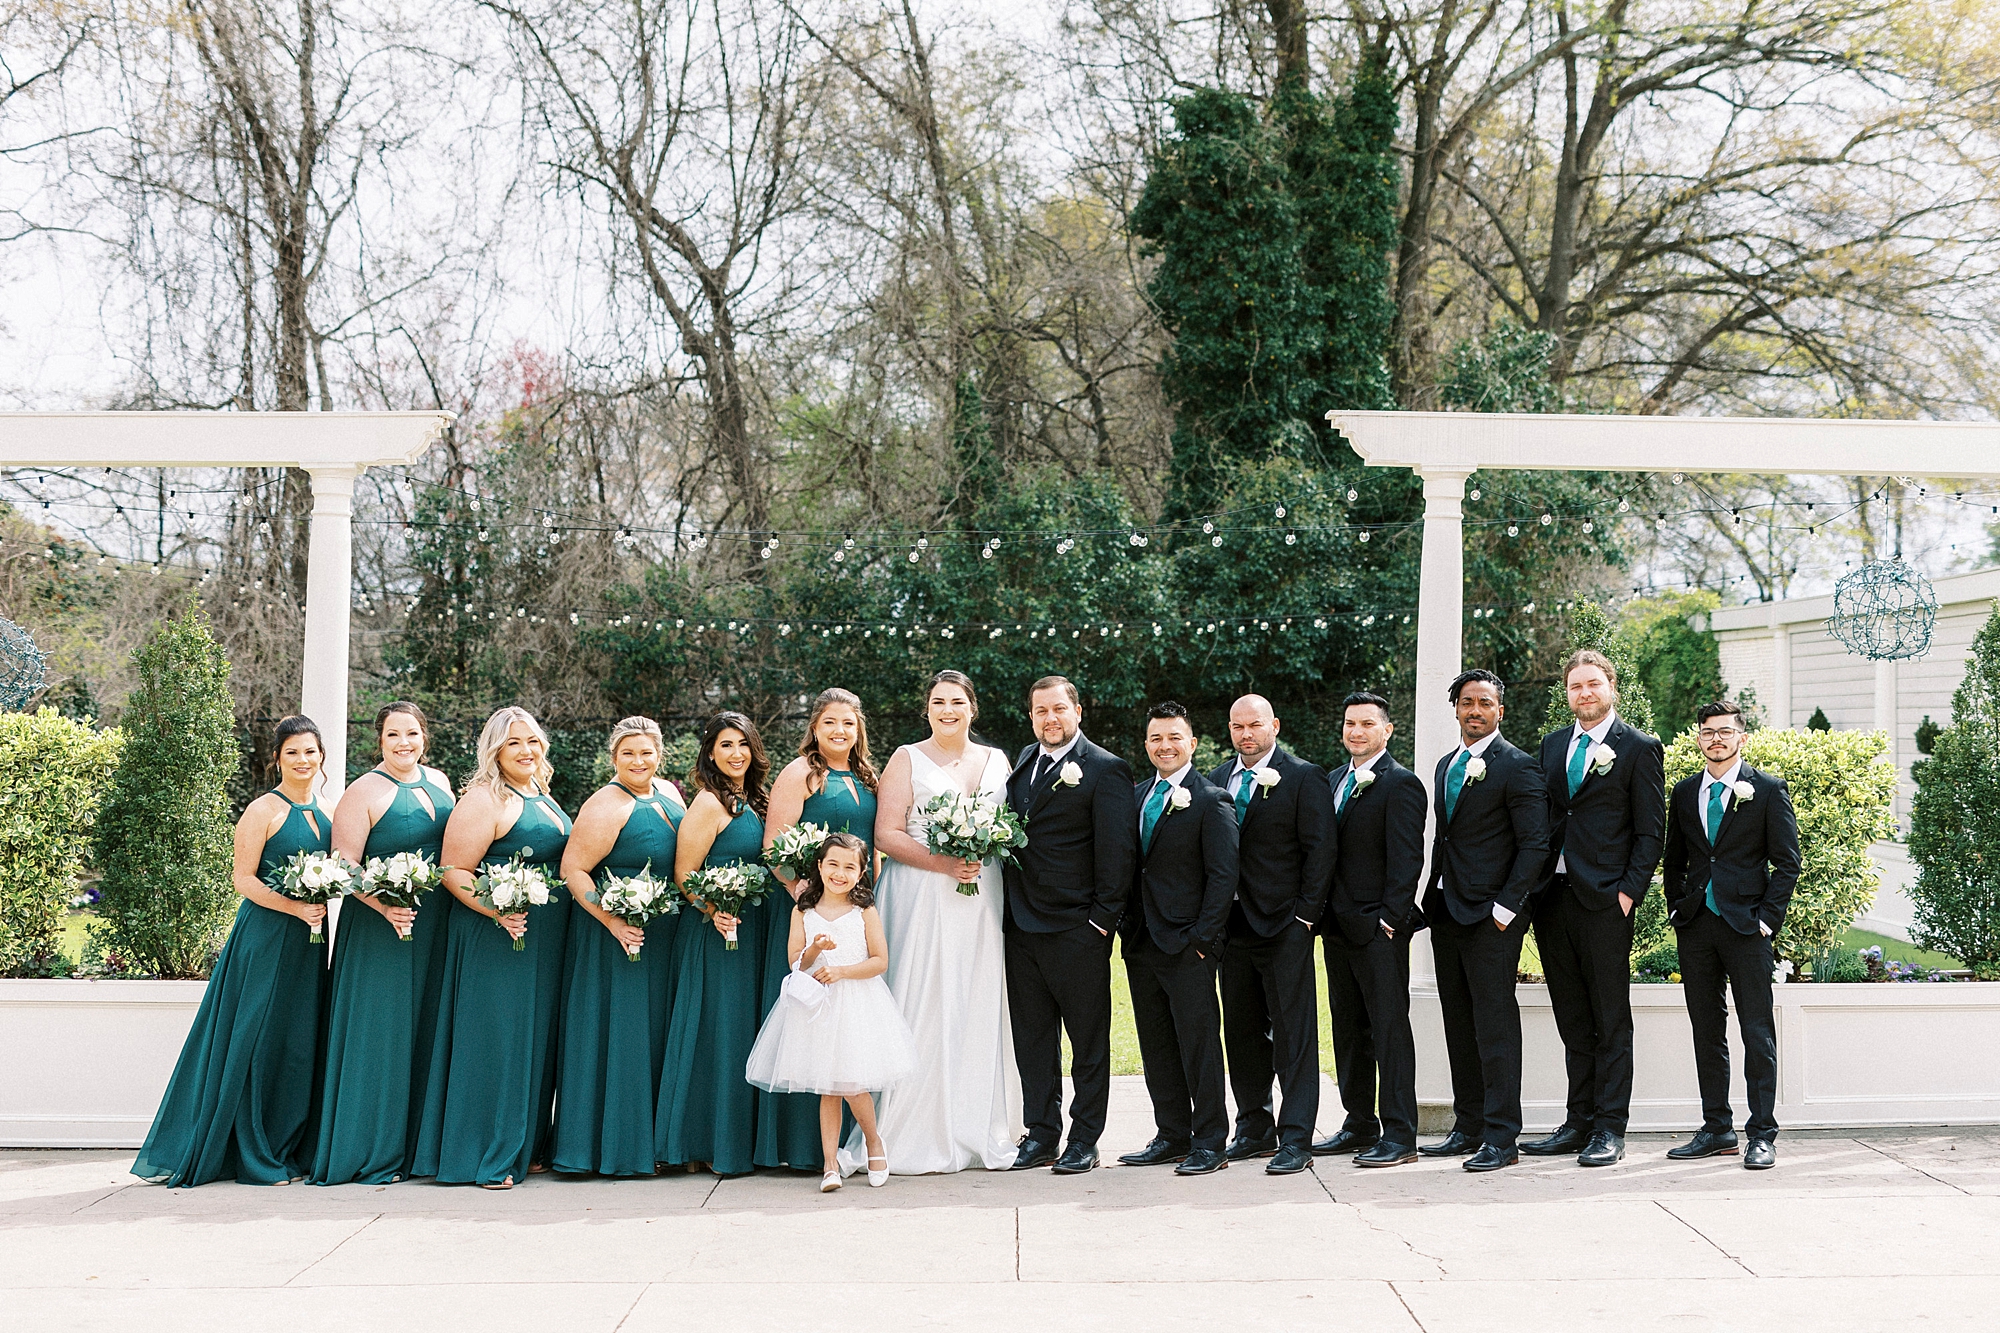 bride and groom stand with wedding party in emerald green gowns and black suits